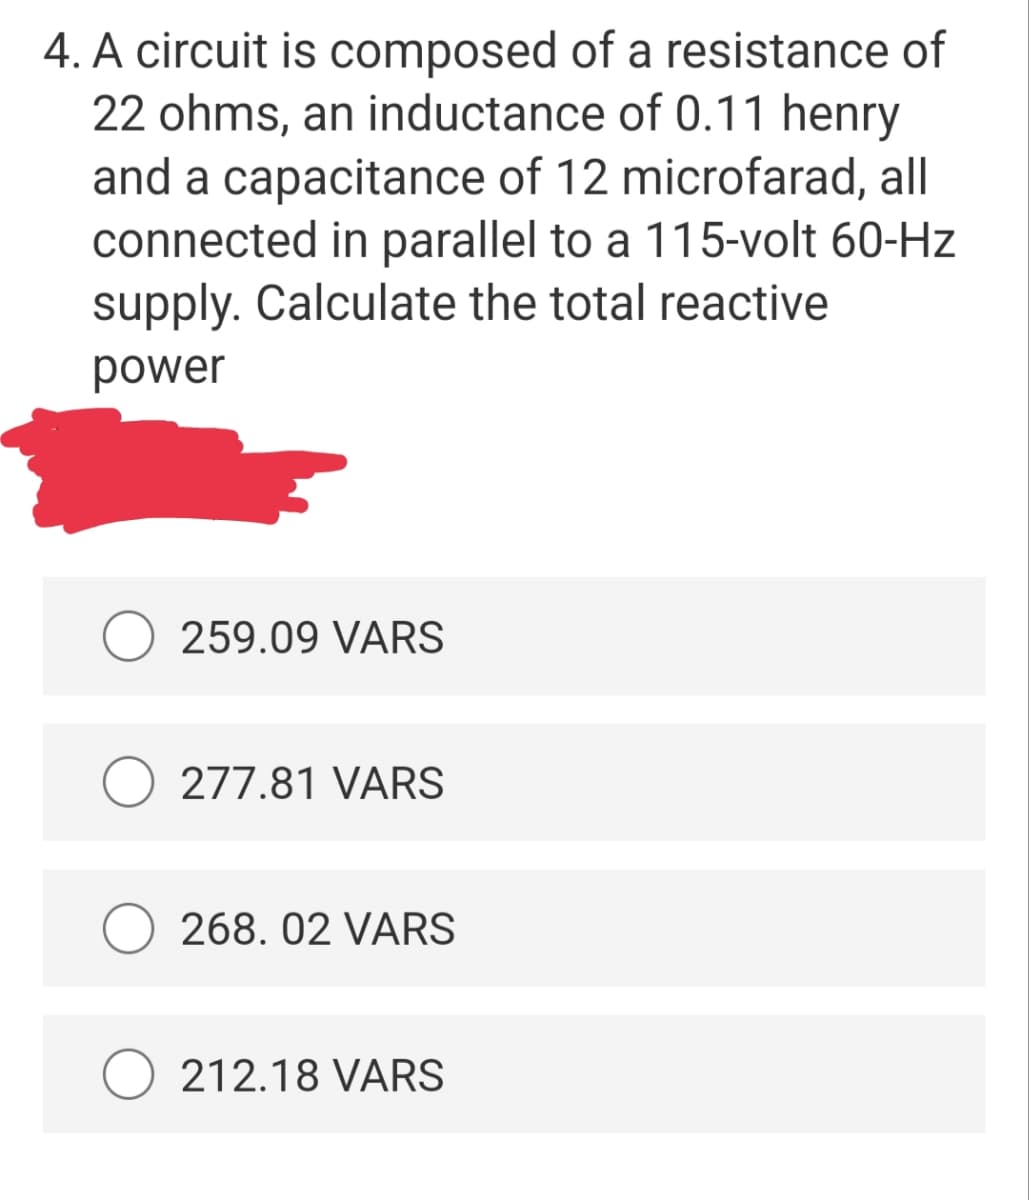 4. A circuit is composed of a resistance of
22 ohms, an inductance of 0.11 henry
and a capacitance of 12 microfarad, all
connected in parallel to a 115-volt 60-Hz
supply. Calculate the total reactive
power
259.09 VARS
277.81 VARS
268. 02 VARS
212.18 VARS
